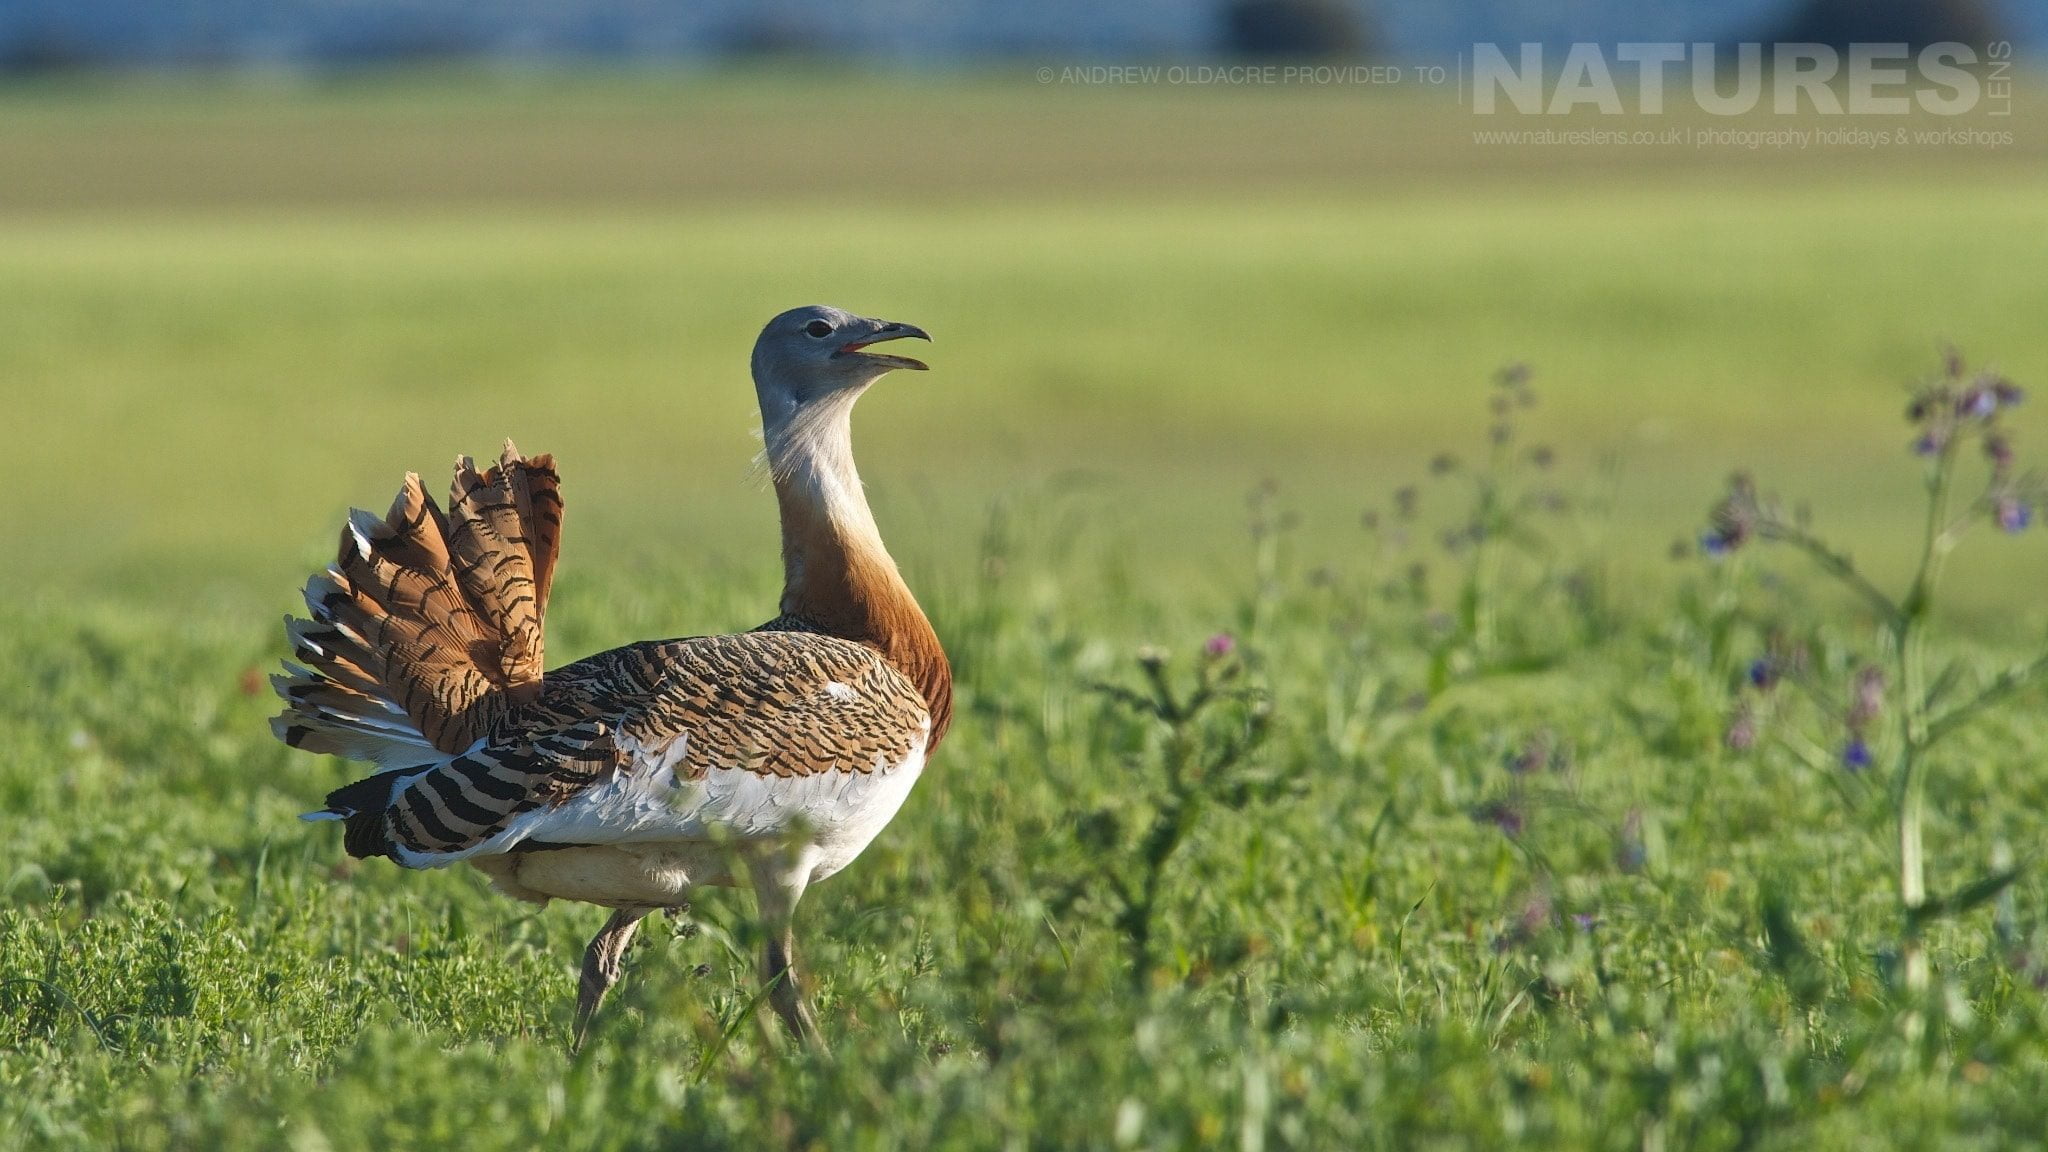 A Greater Bustard On The Spanish Plains - Photographed On The Natureslens Birds Of Calera Photography Holiday